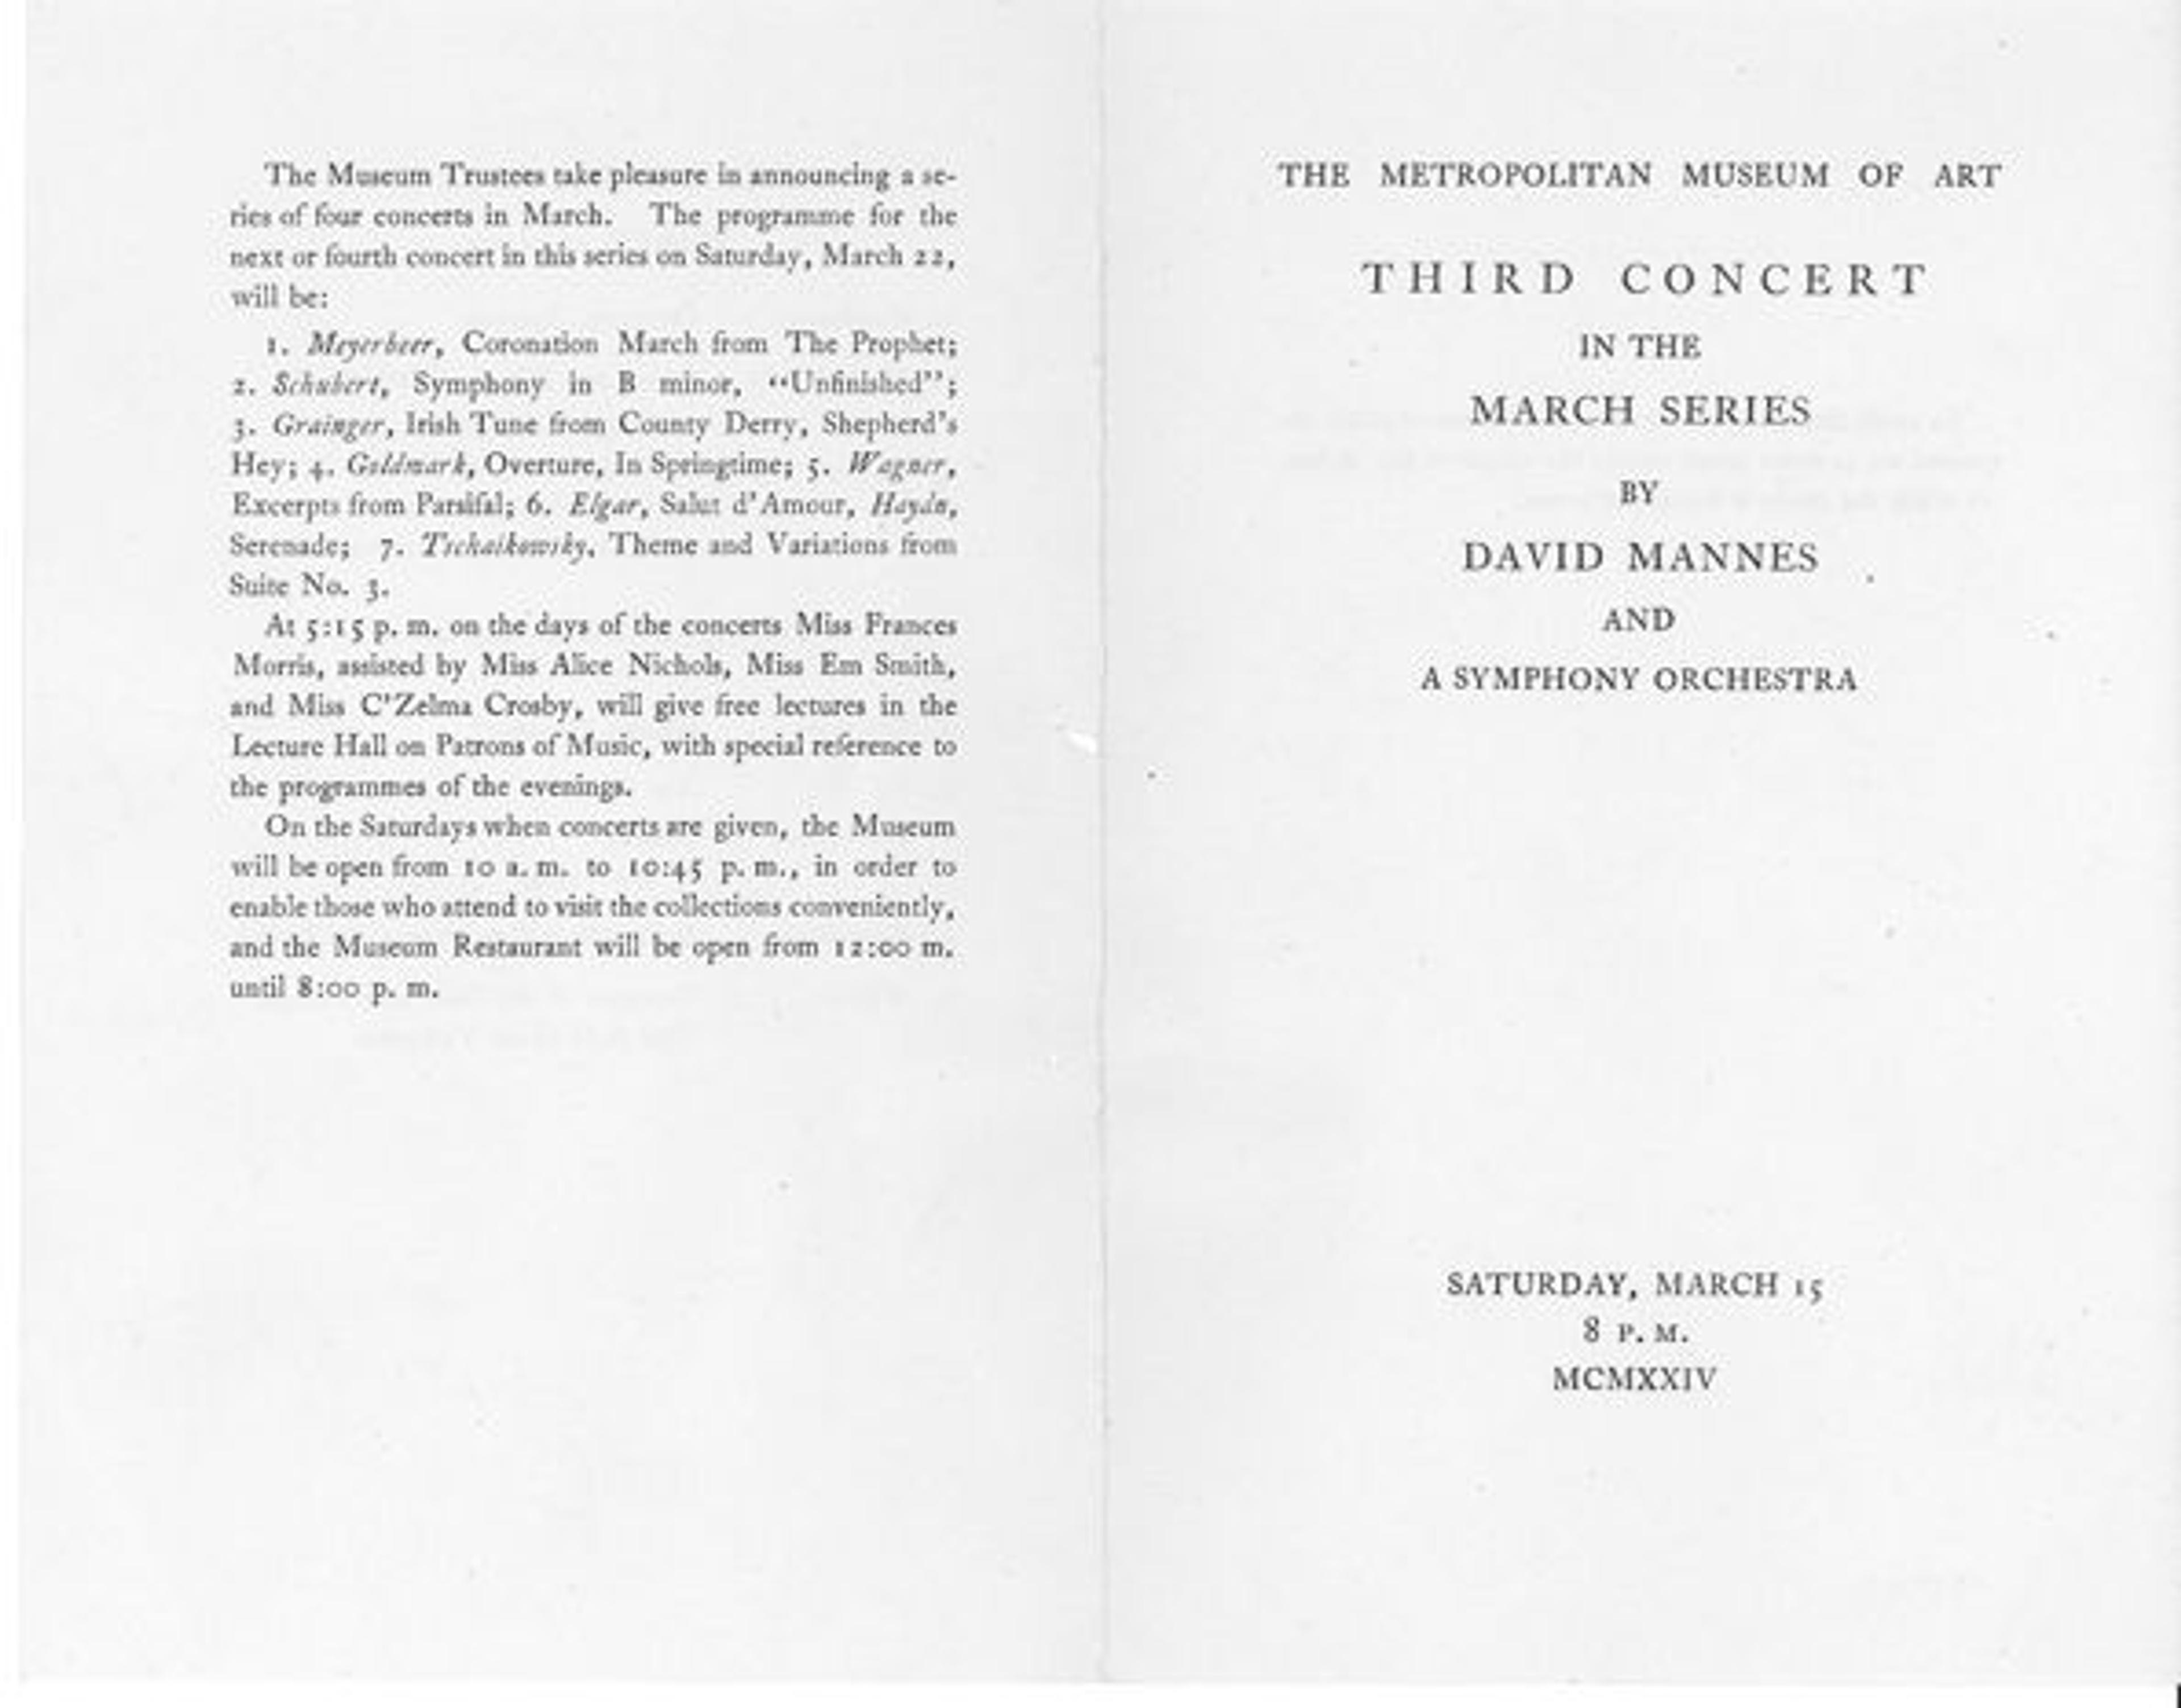 Program for a 1924 concert by "David Mannes and a symphony orchestra"